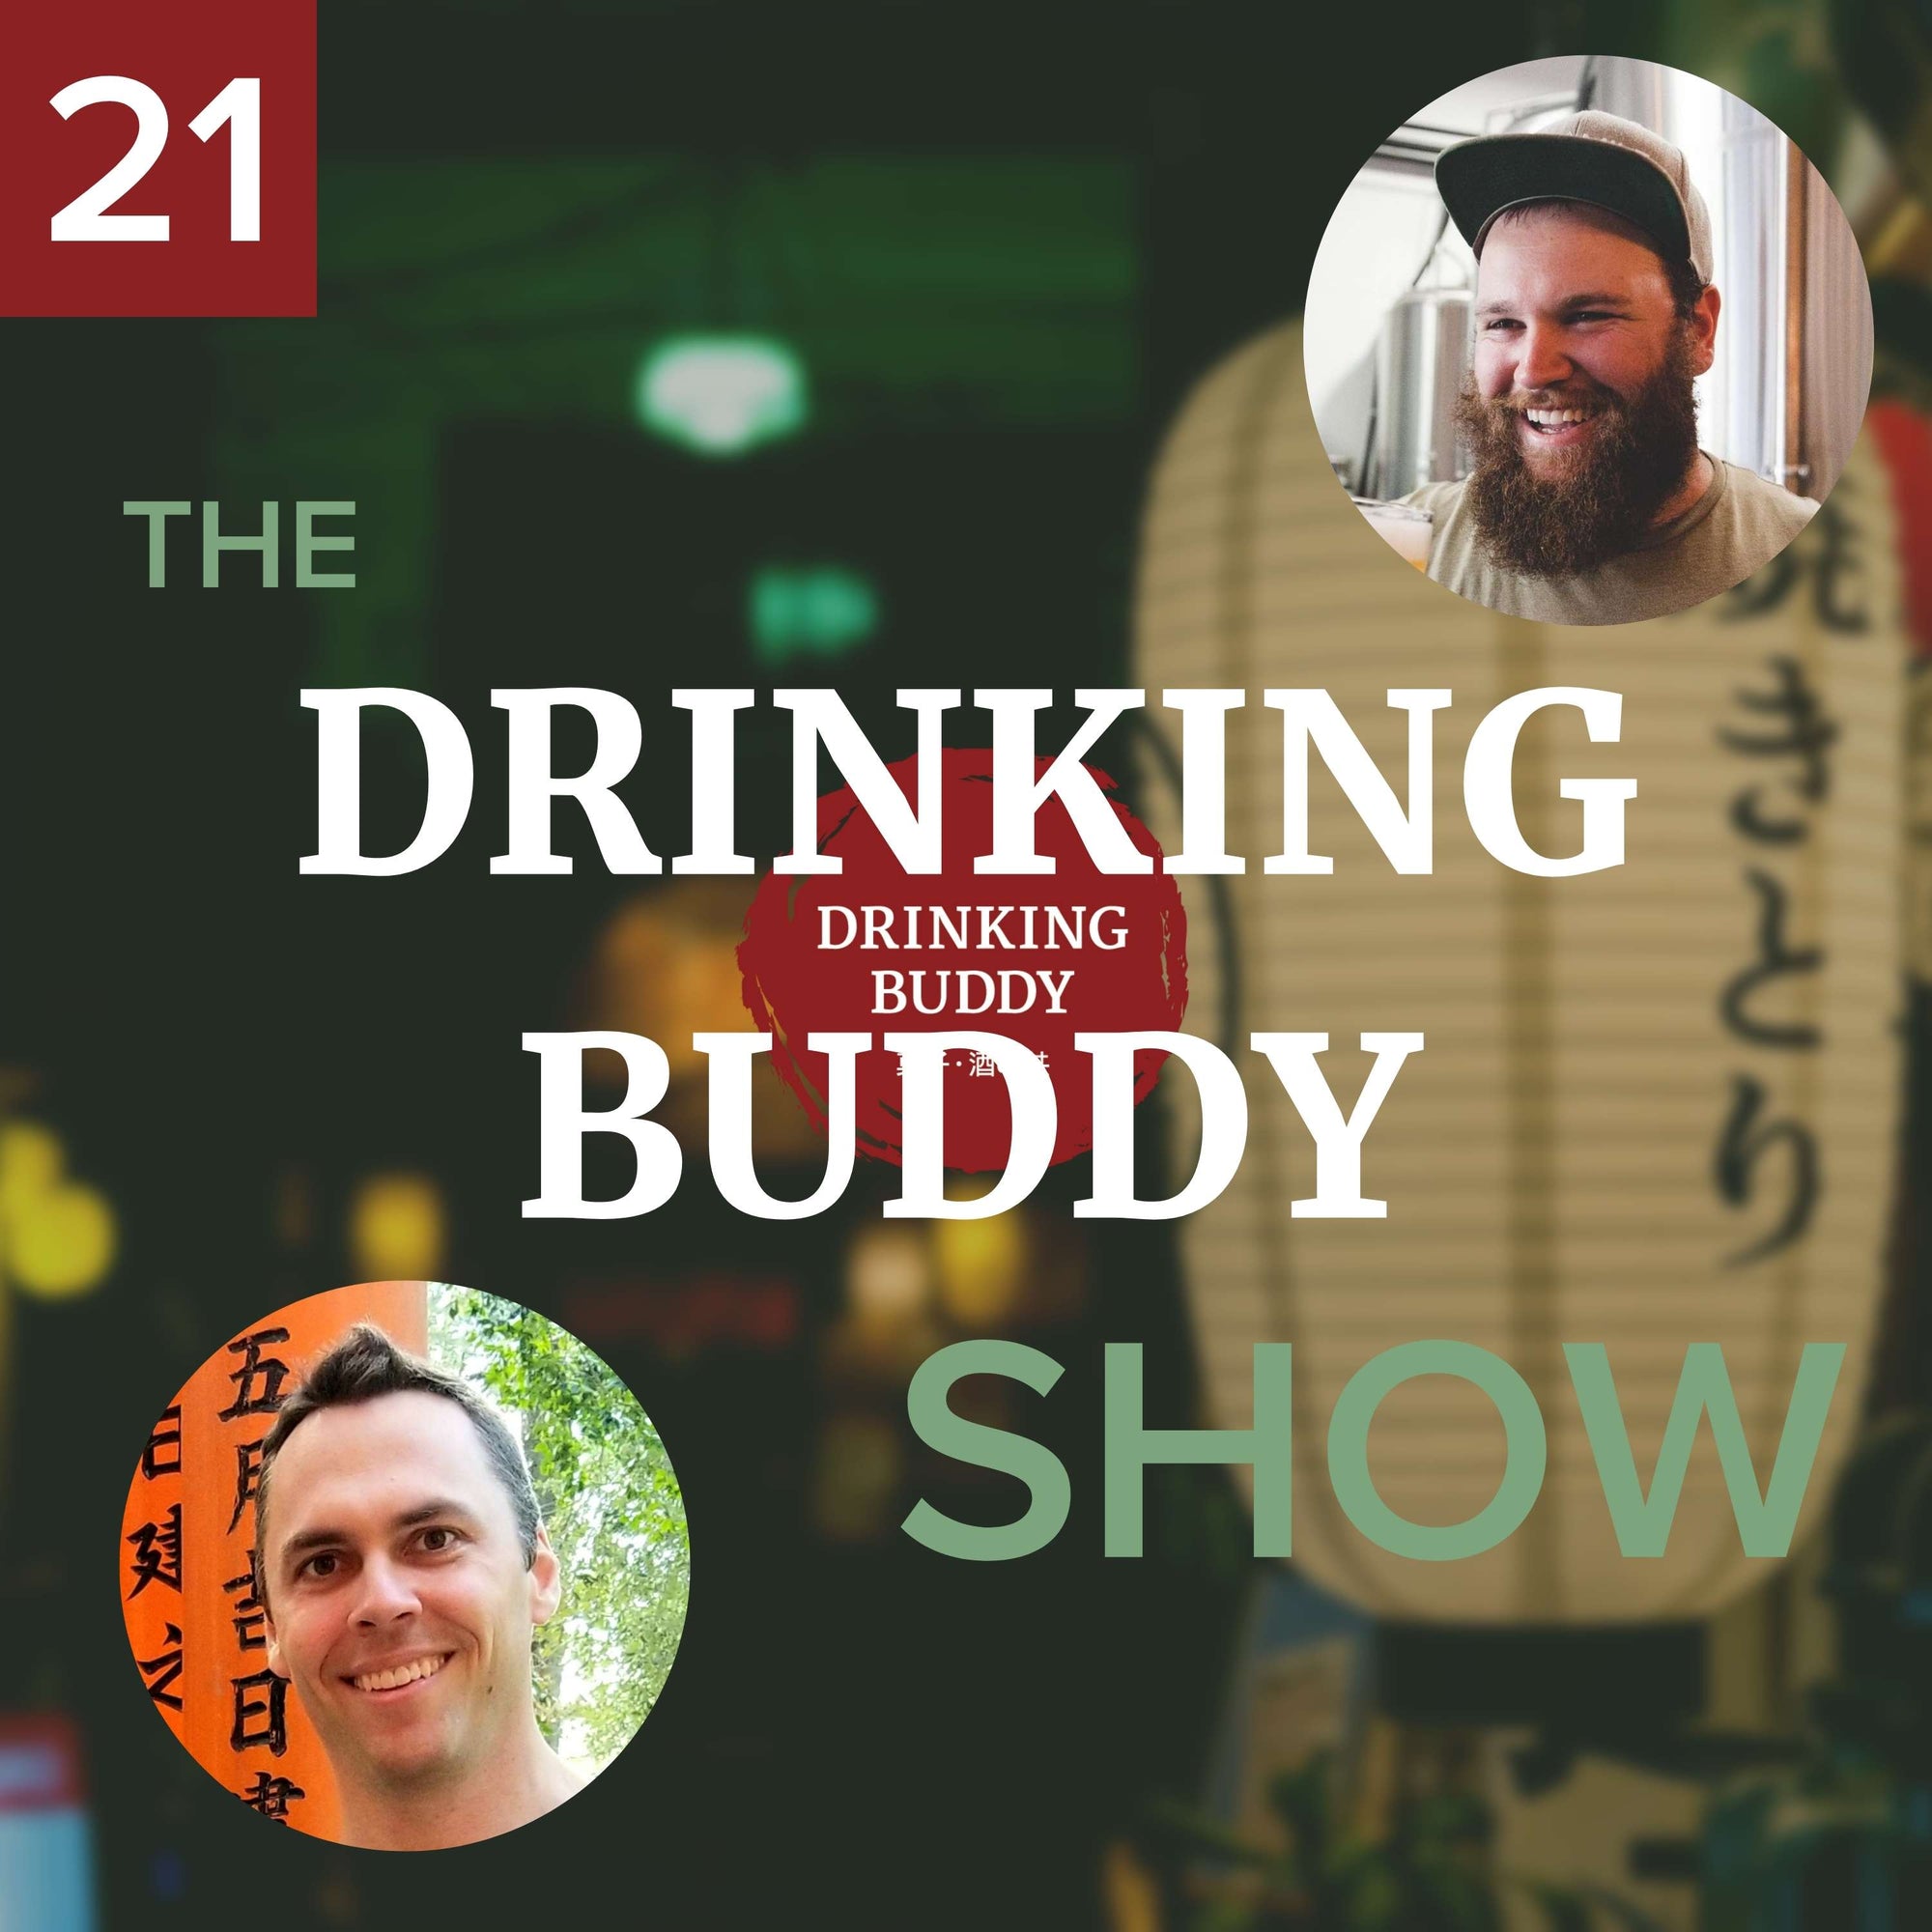 Jesse Sundstrom head brewer of Ten Mile Brewing in Signal Hill CA on the Drinking Buddy Show podcast